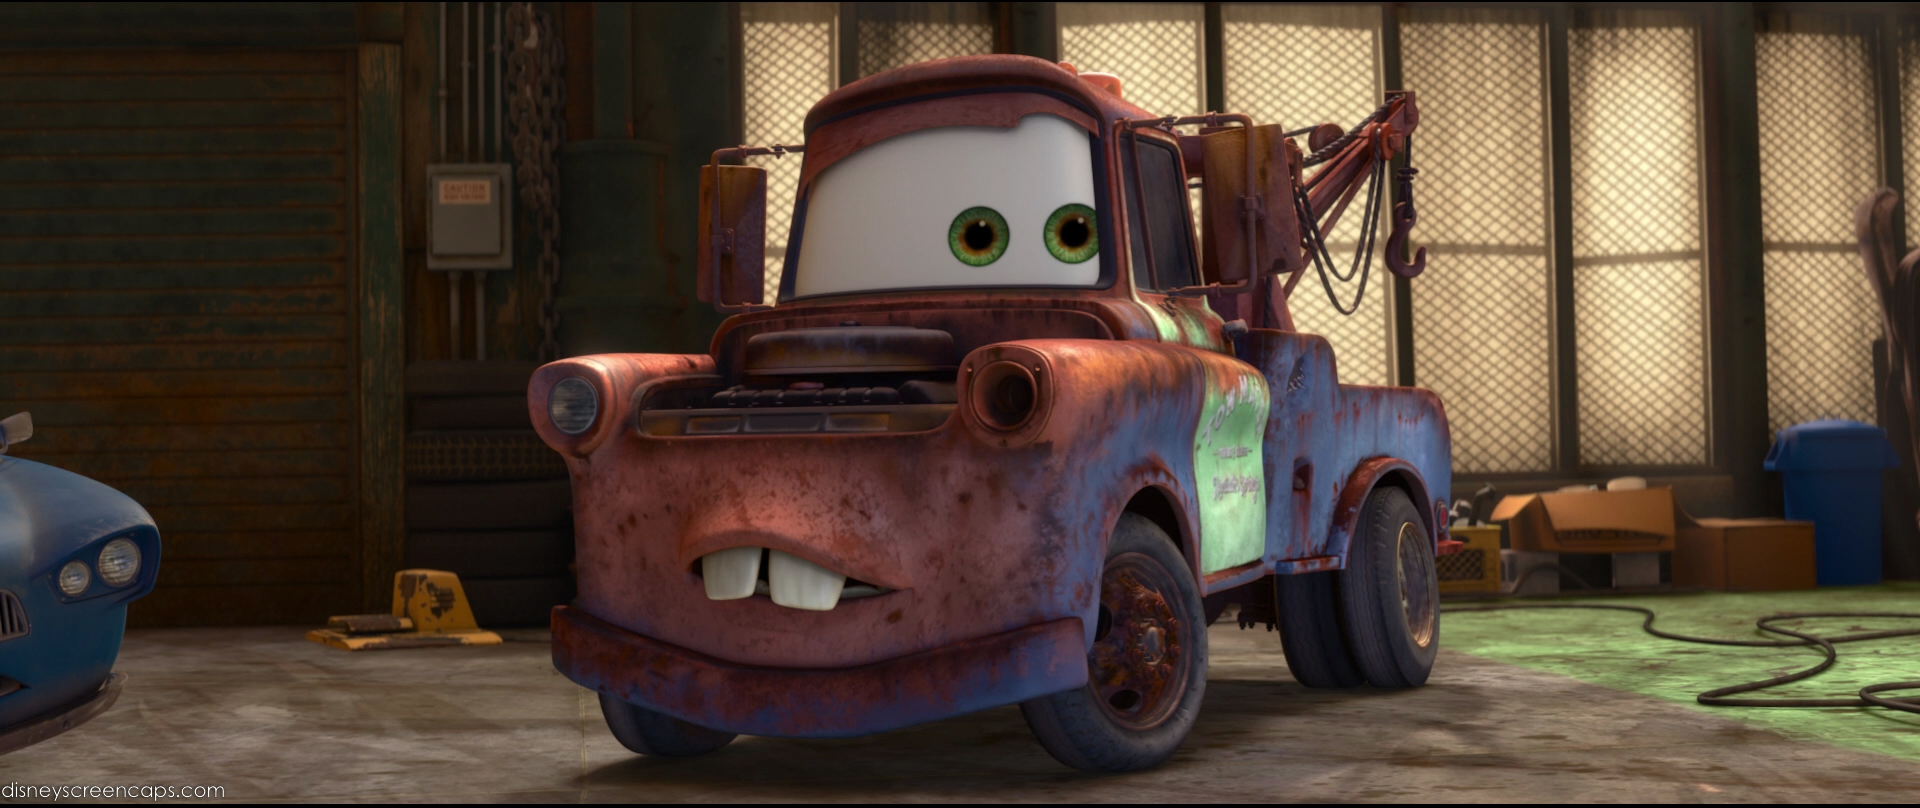 Mater The Tow Truck Image Beloved And